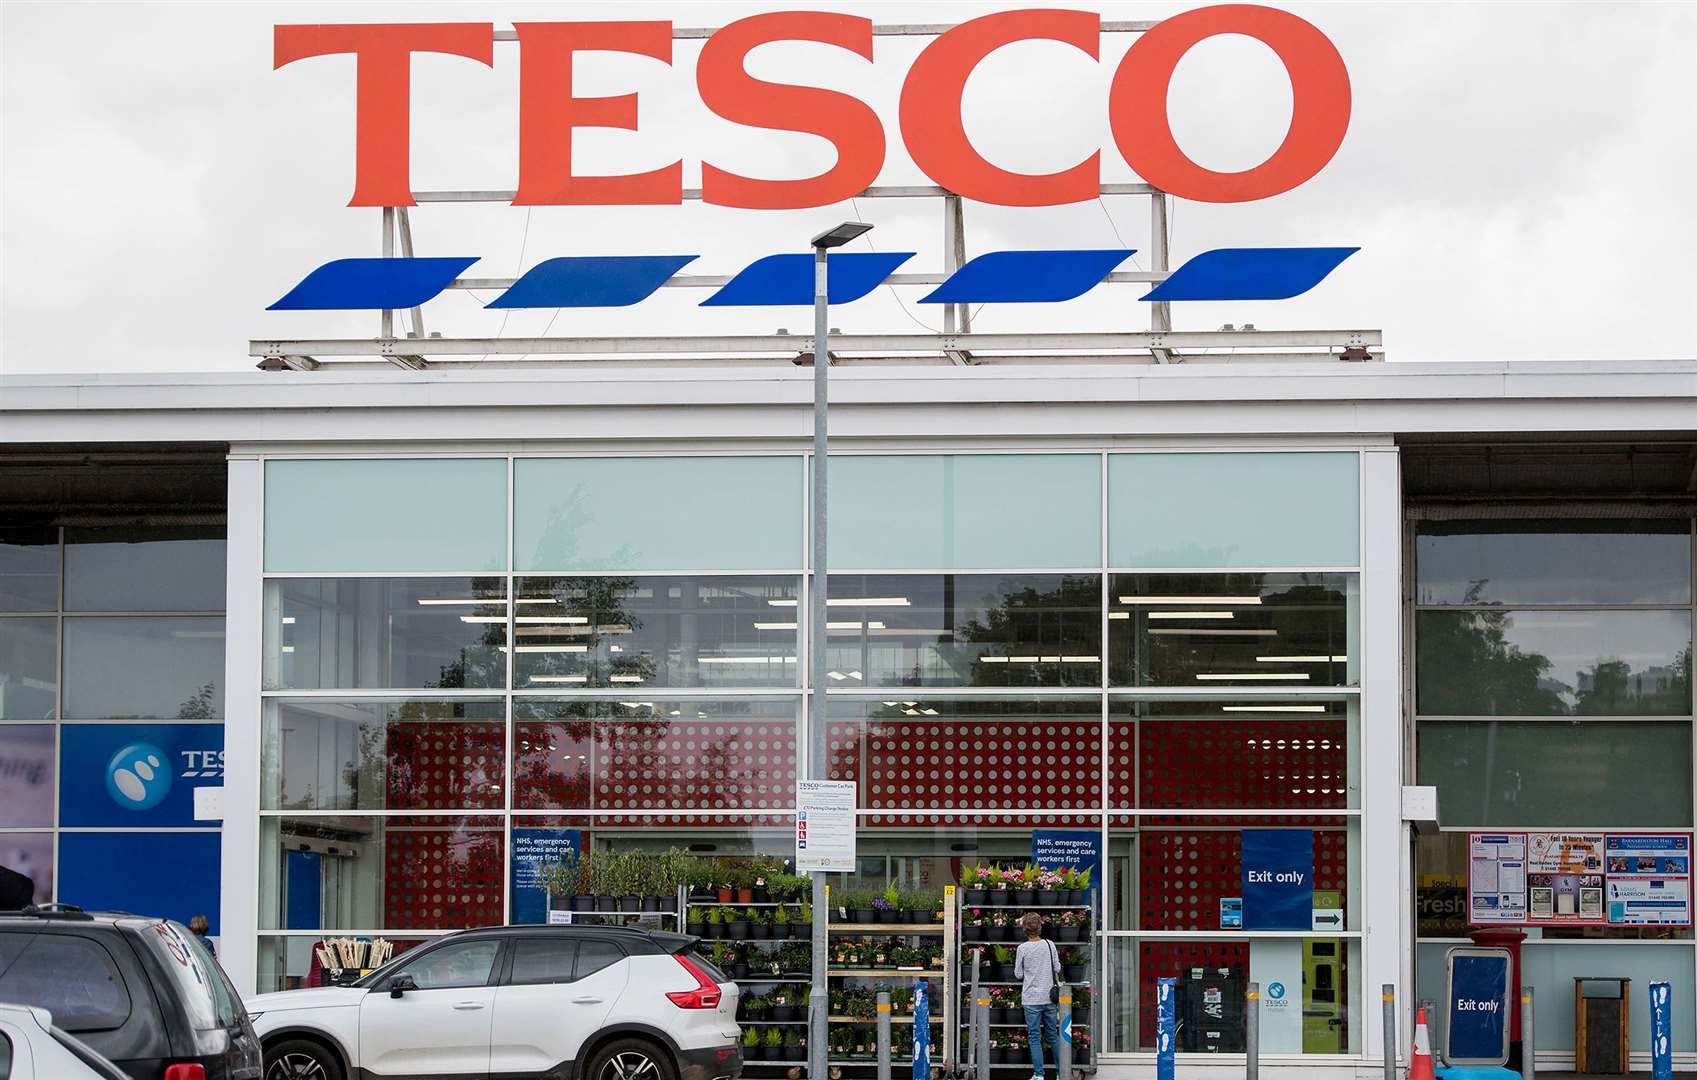 Tesco is recalling items in its Free From range which mistakenly contain gluten